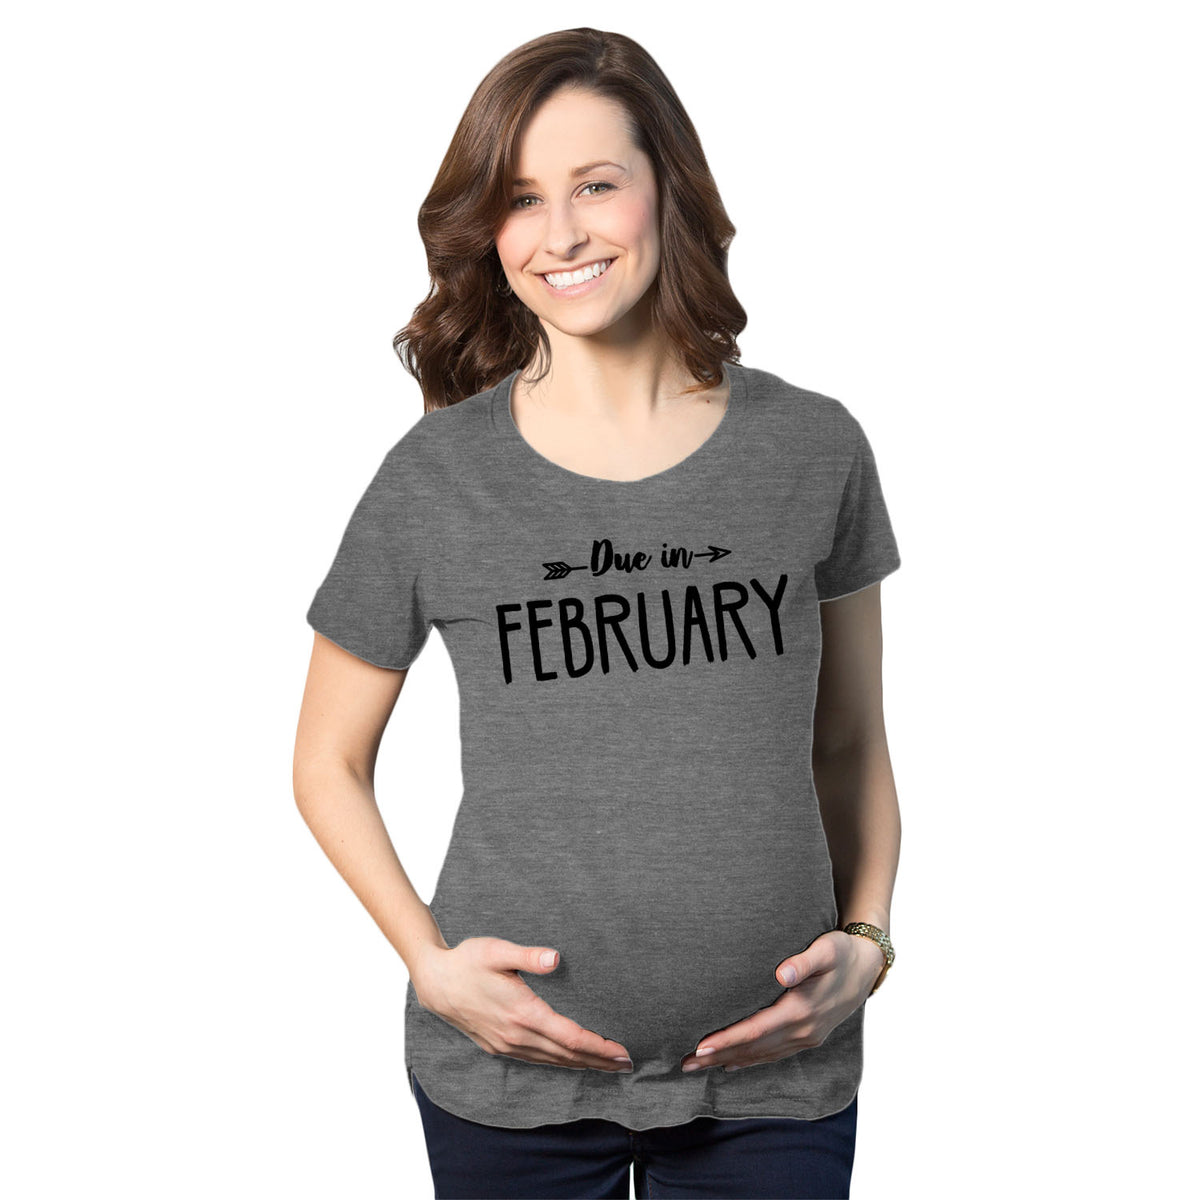 Funny Dark Heather Grey - February Due In Announcement Maternity T Shirt Nerdy Tee